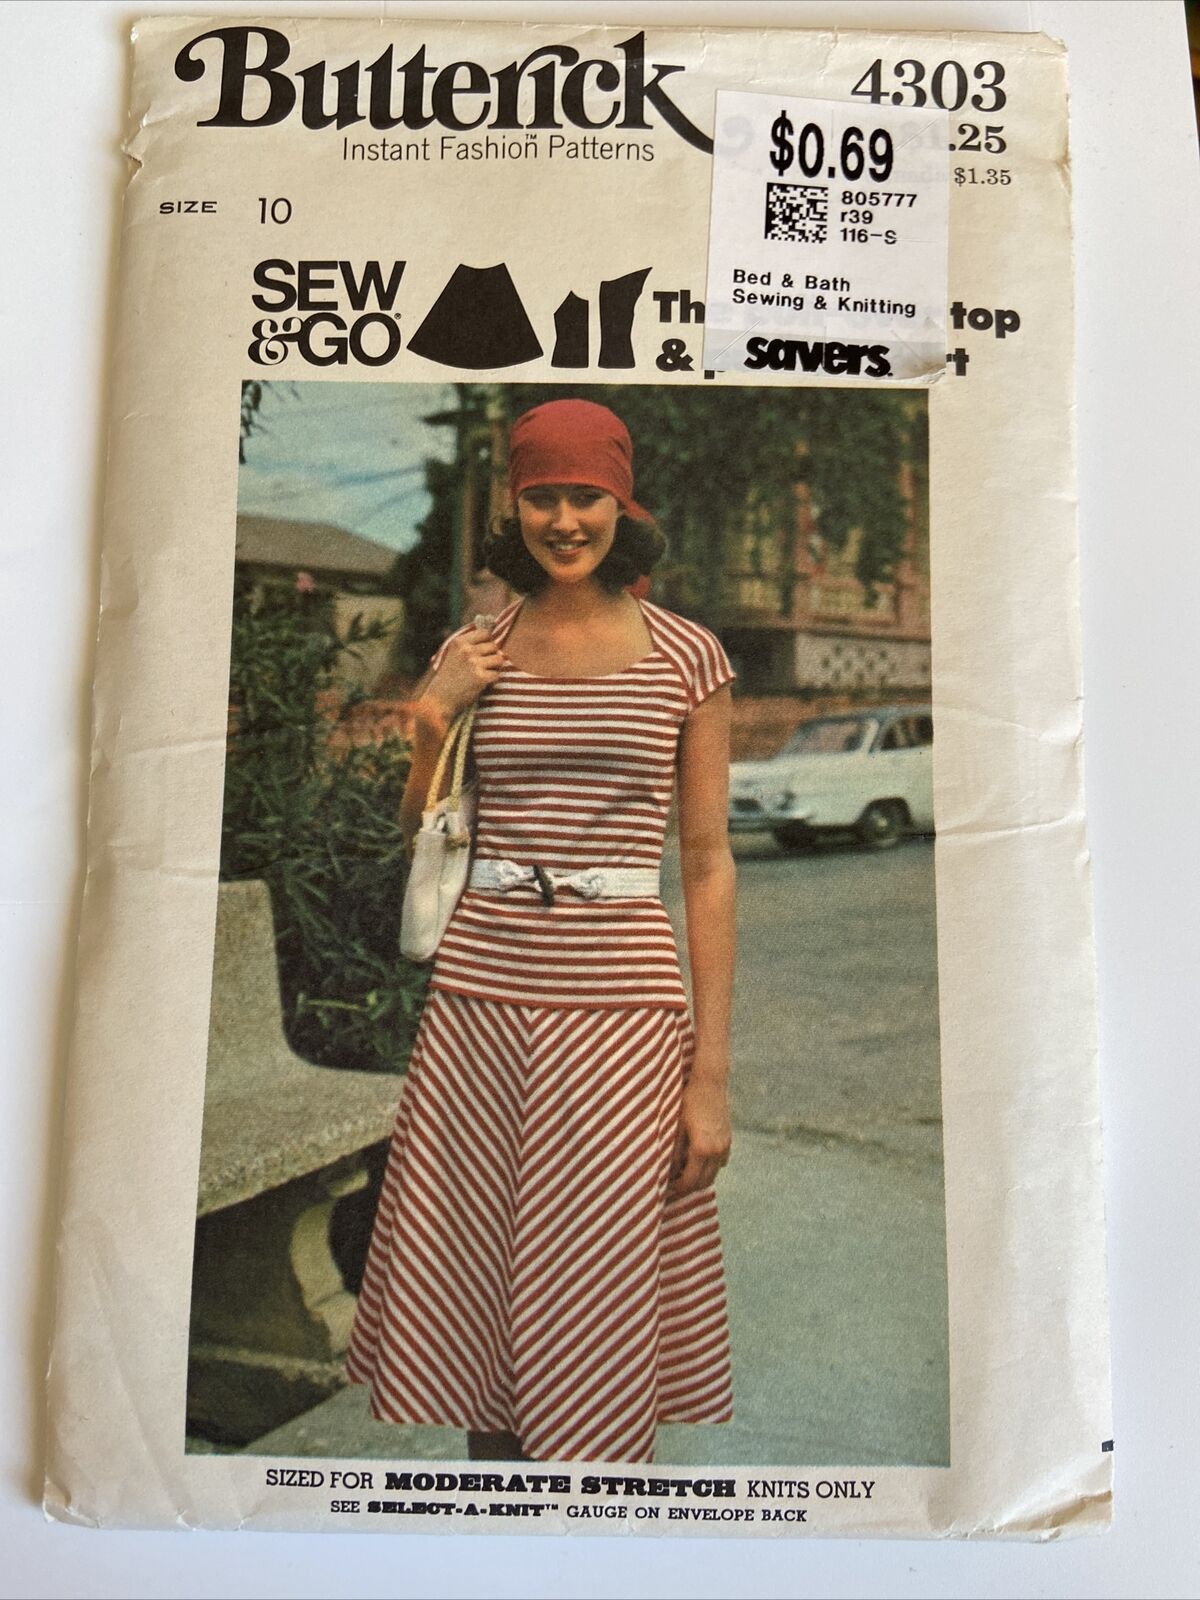 Butterick 4303 Vintage Misses Top and Skirt Size 10 See & Go Knit 70s